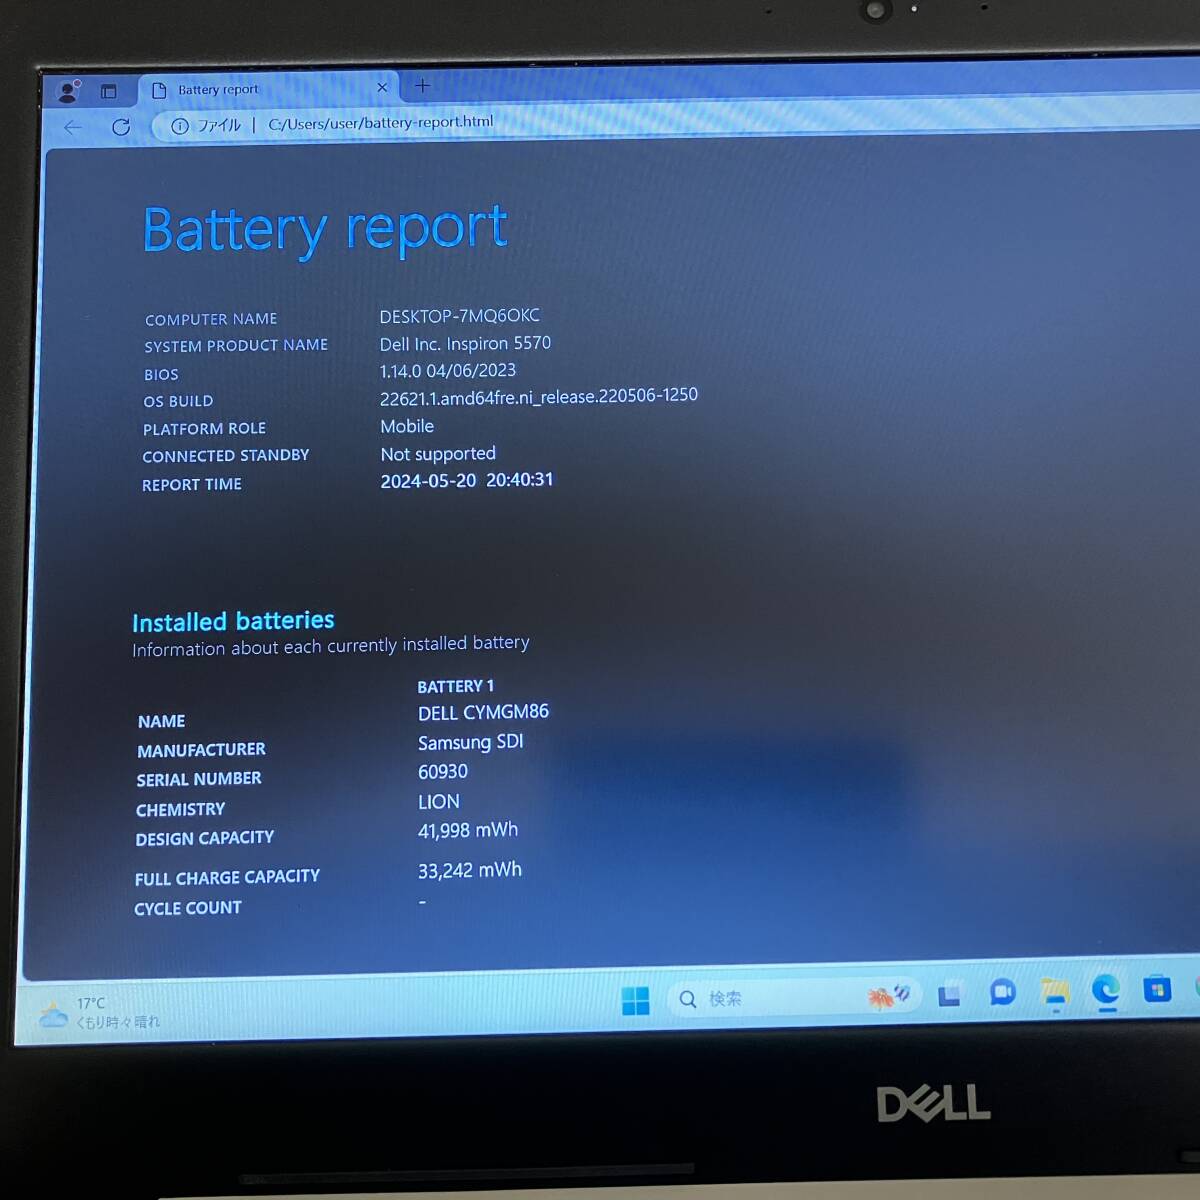  full HD* no. 8 generation i5[. speed SSD/ height capacity memory ]Core i5-8250U,Windows11, popular DELL laptop,Office2021, battery replaced, successful bid privilege 1TB